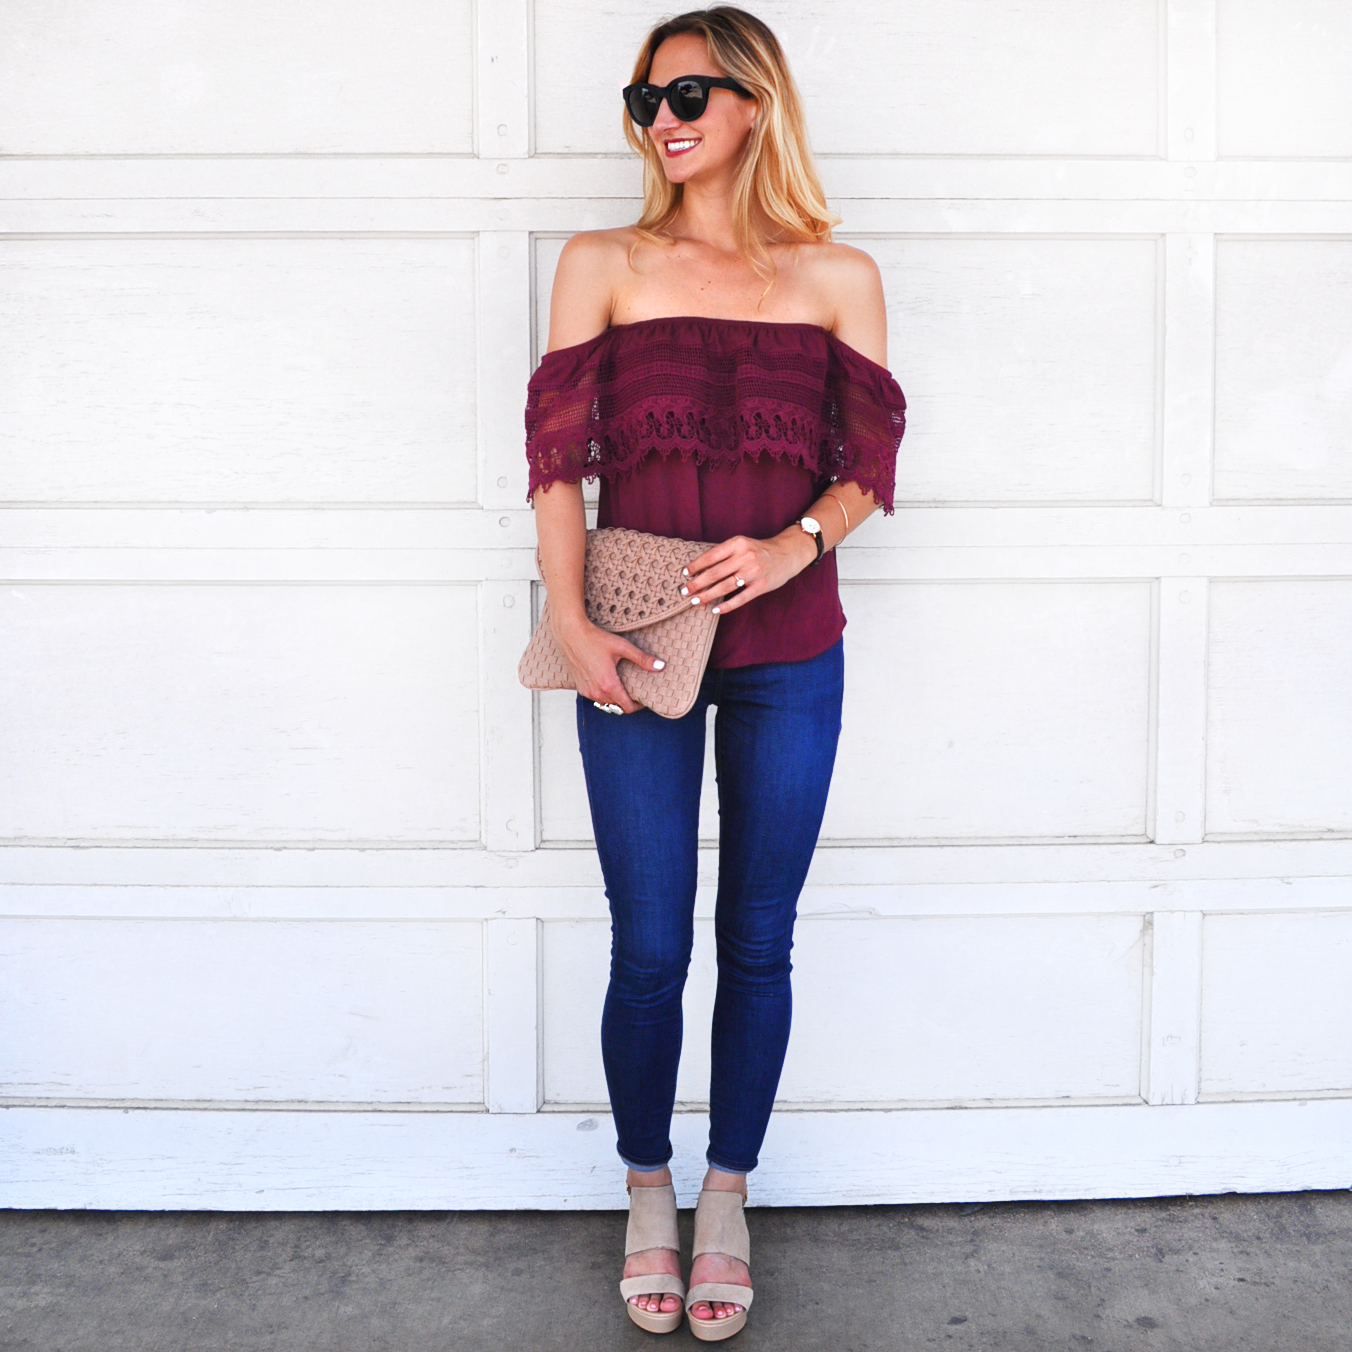 livvyland-blog-olivia-watson-austin-texas-fashion-blogger-socialite-lace-off-the-shoulder-top-plum-topshop-leigh-skinny-jeans-6